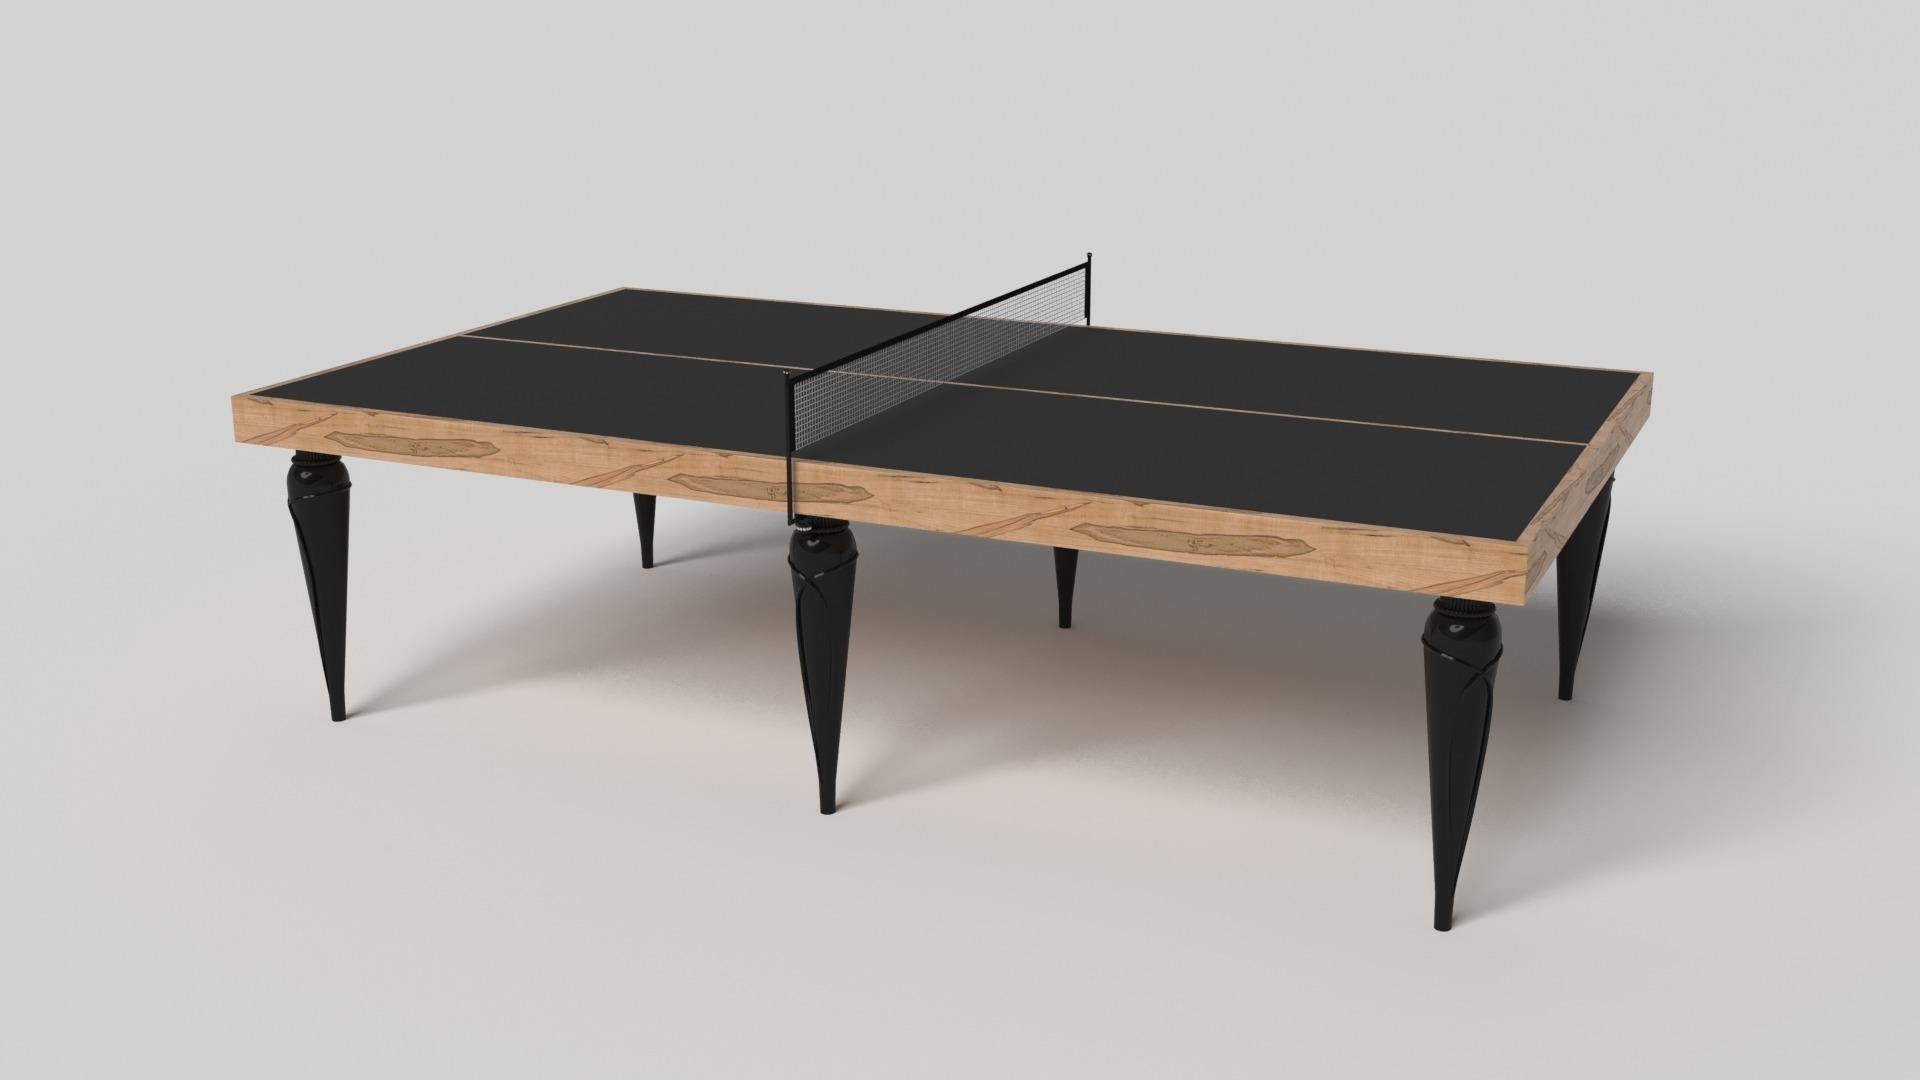 Champagne gold accents add undeniable elegance to this luxury table tennis table. Offering superior playability and uncompromised style, this design features hand carved details, decorative metal elements, and metal sabots at the bottom of each leg.